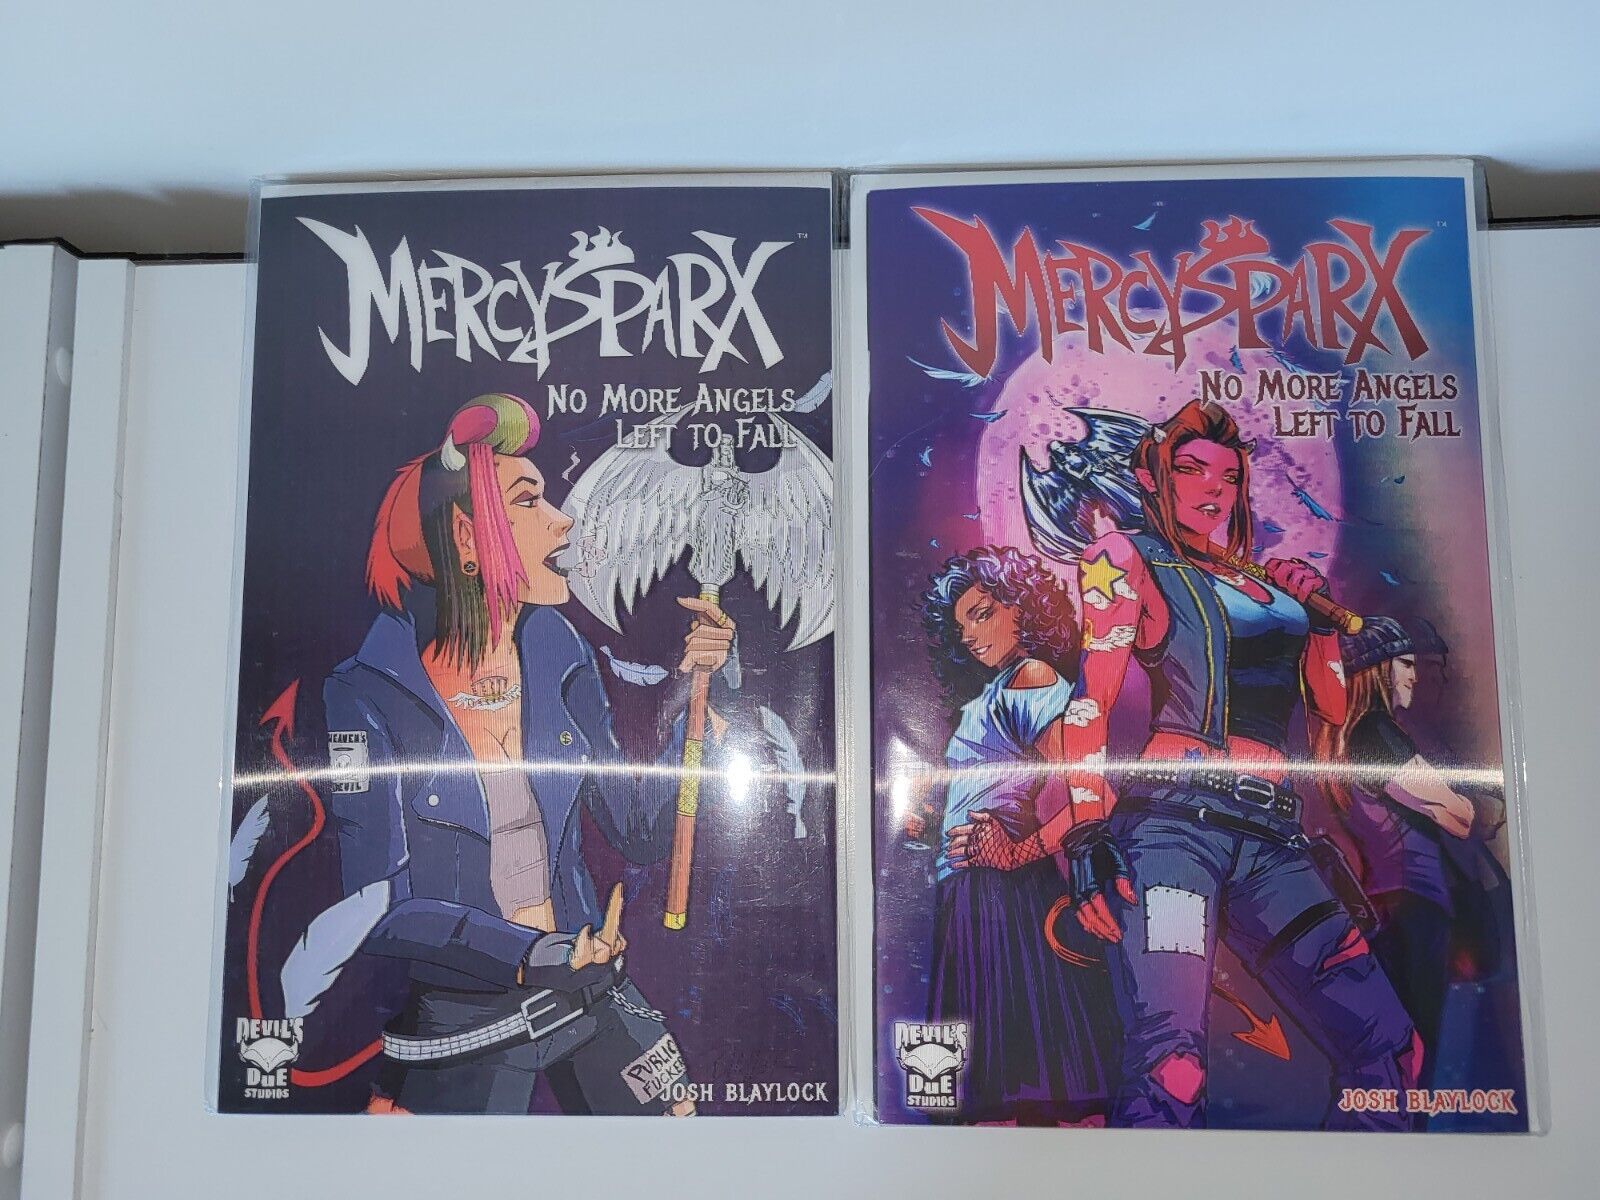 MERCY SPARX No More Angels Left To Fall Kickstarter Exclusive 3D Lenticular DDP